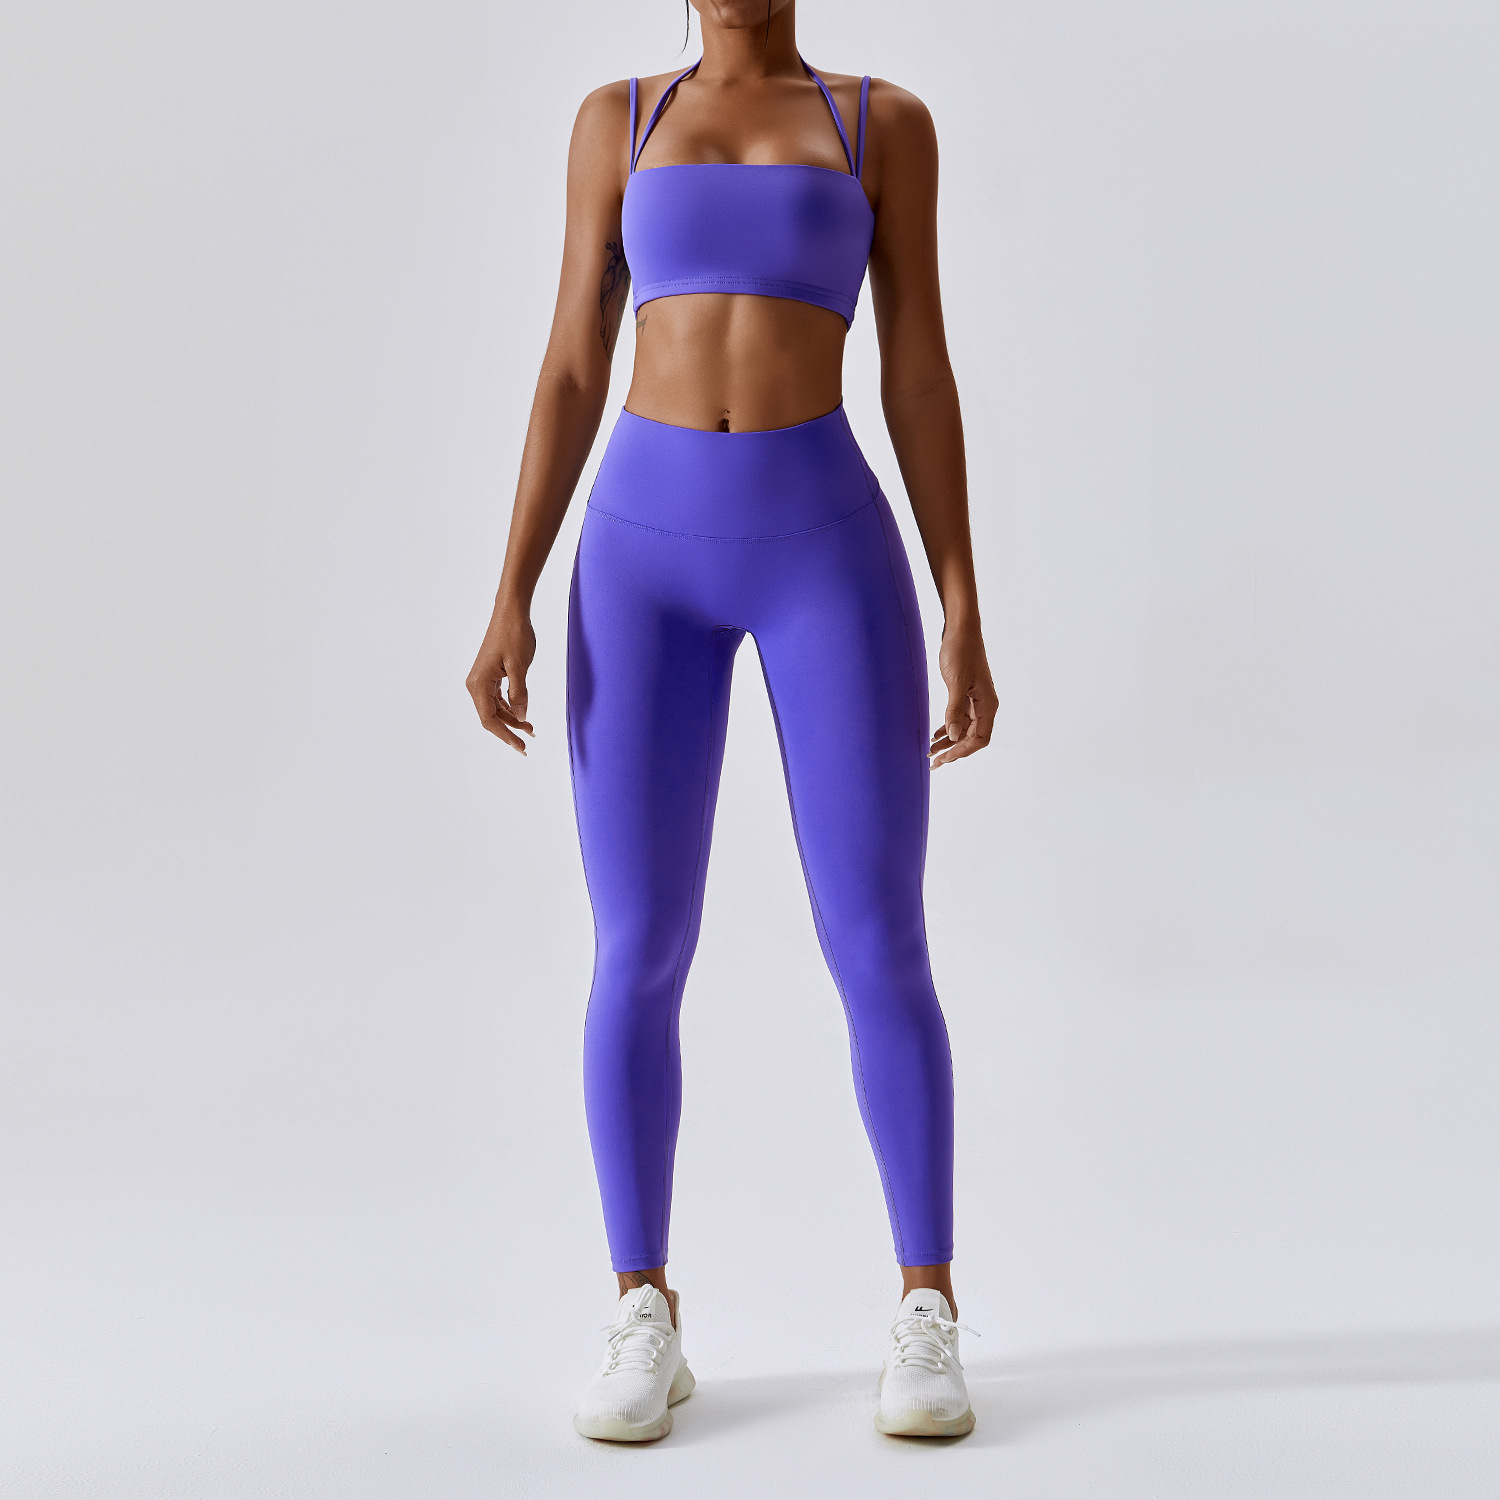 sports clothing manufacturers